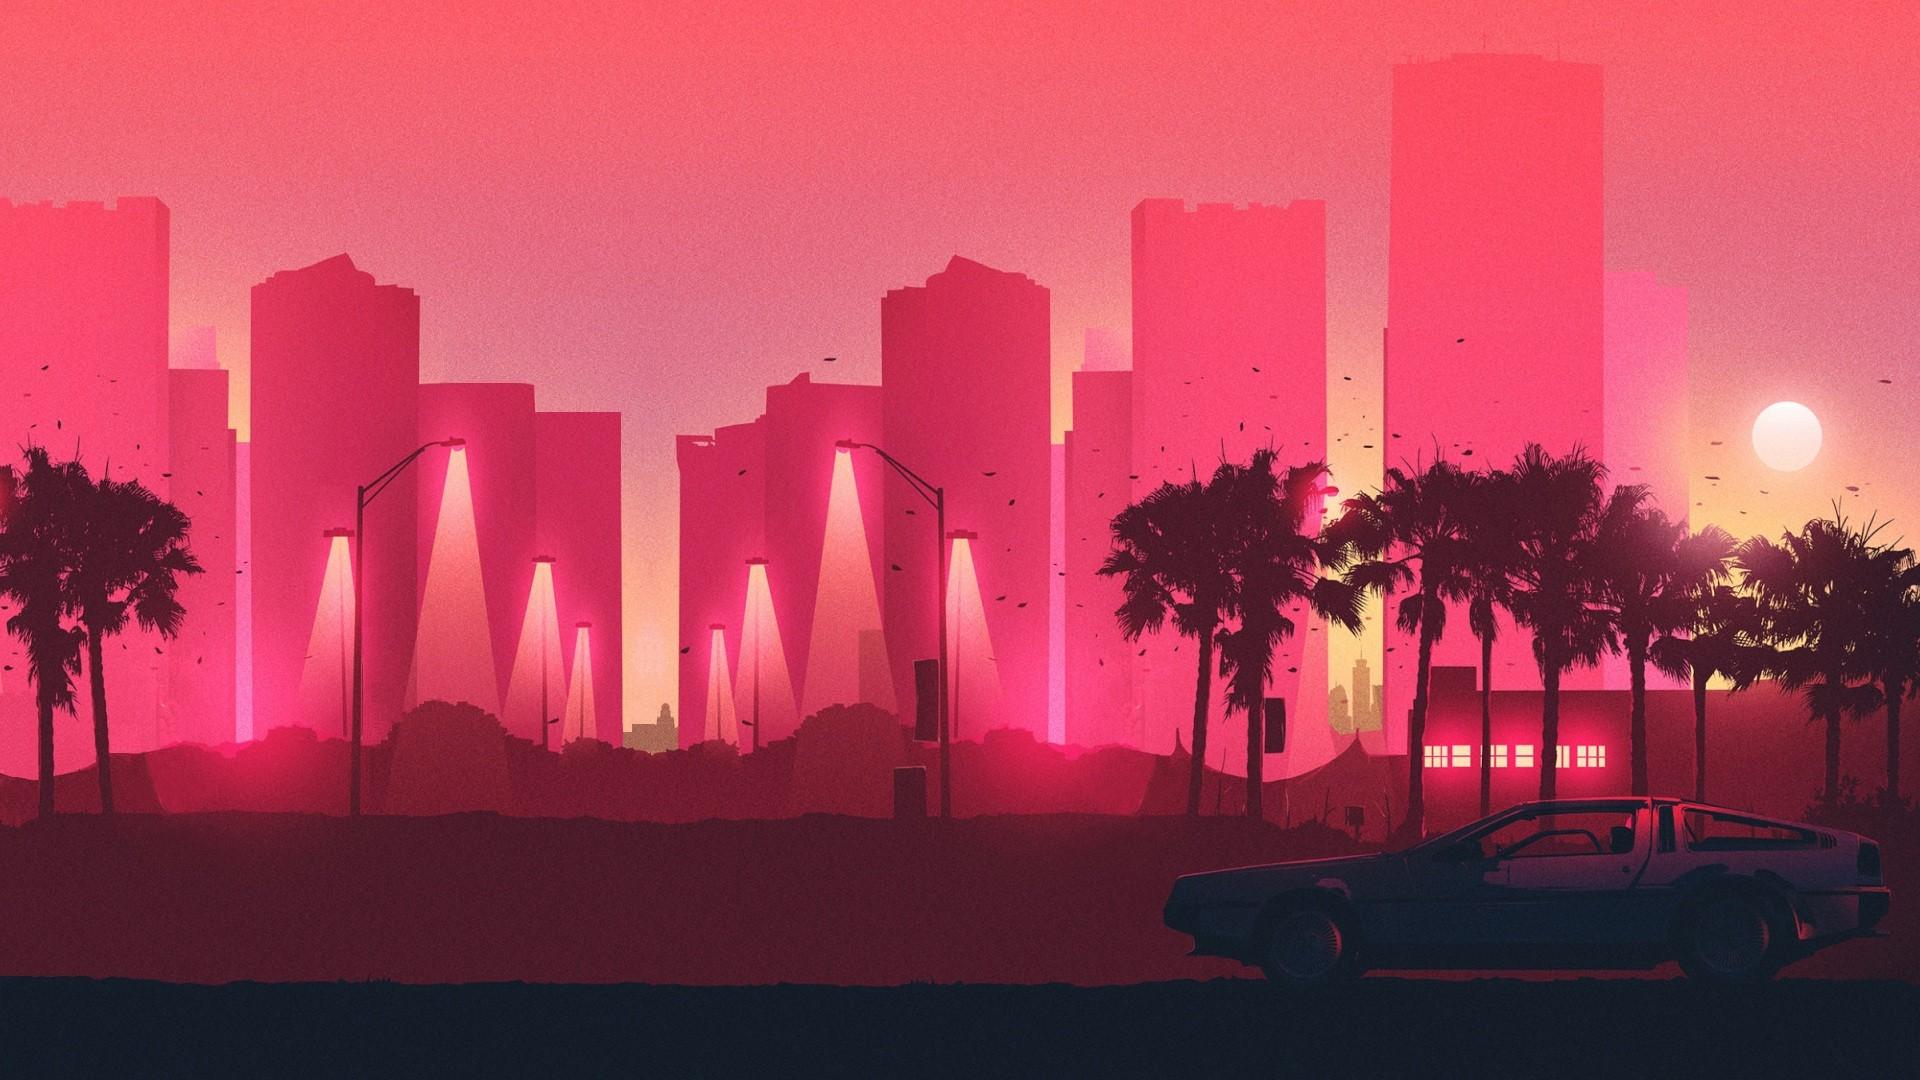 HD wallpaper, Pink, Hotline Miami, Synthwave, Delorean, Palm Trees, Cityscape, 80Scity, Artwork, Back To The Future, Car, Red